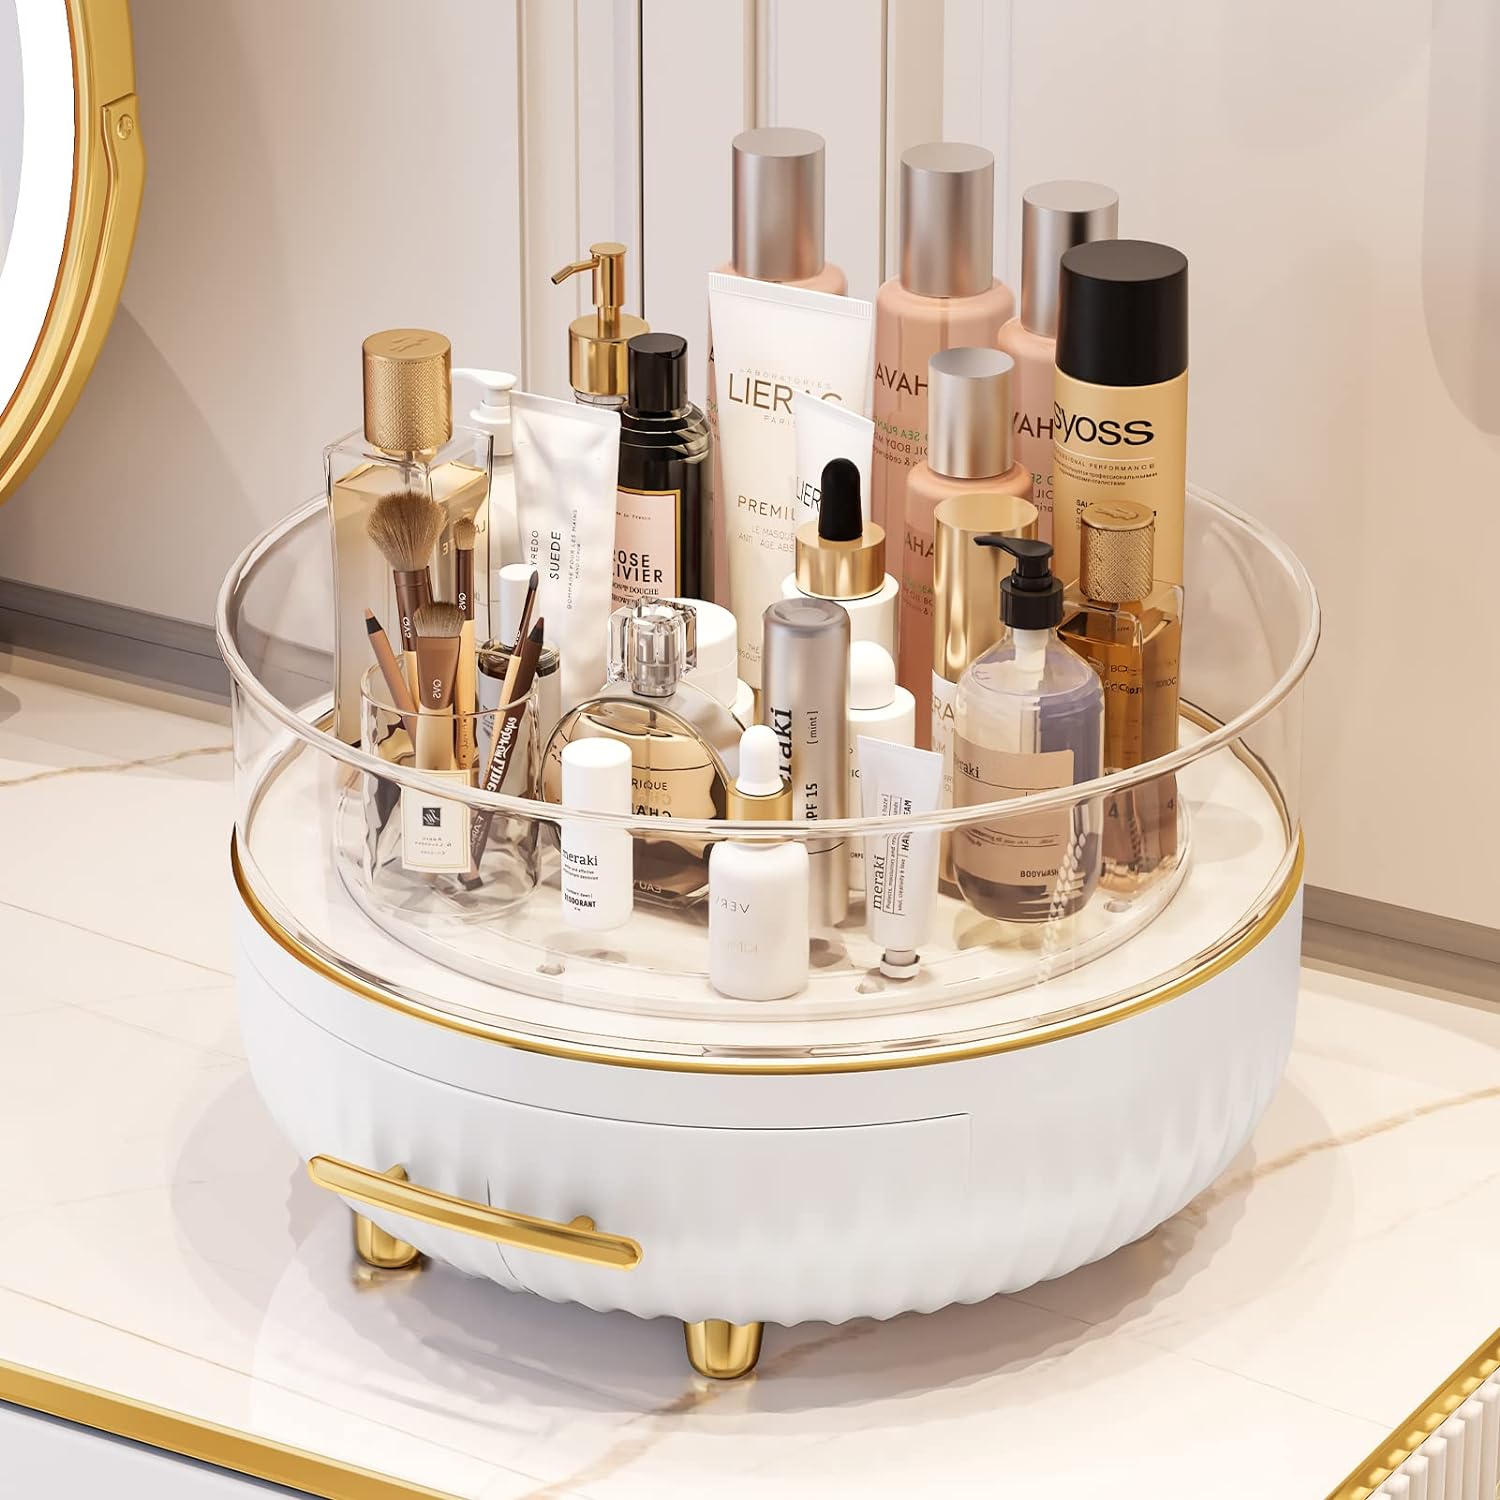 Makeup Skin Care Organizer for Dresser, Perfume Tray, 360 Degree Rotating Lazy Susan Cosmetic Storage, Contains a Drawer